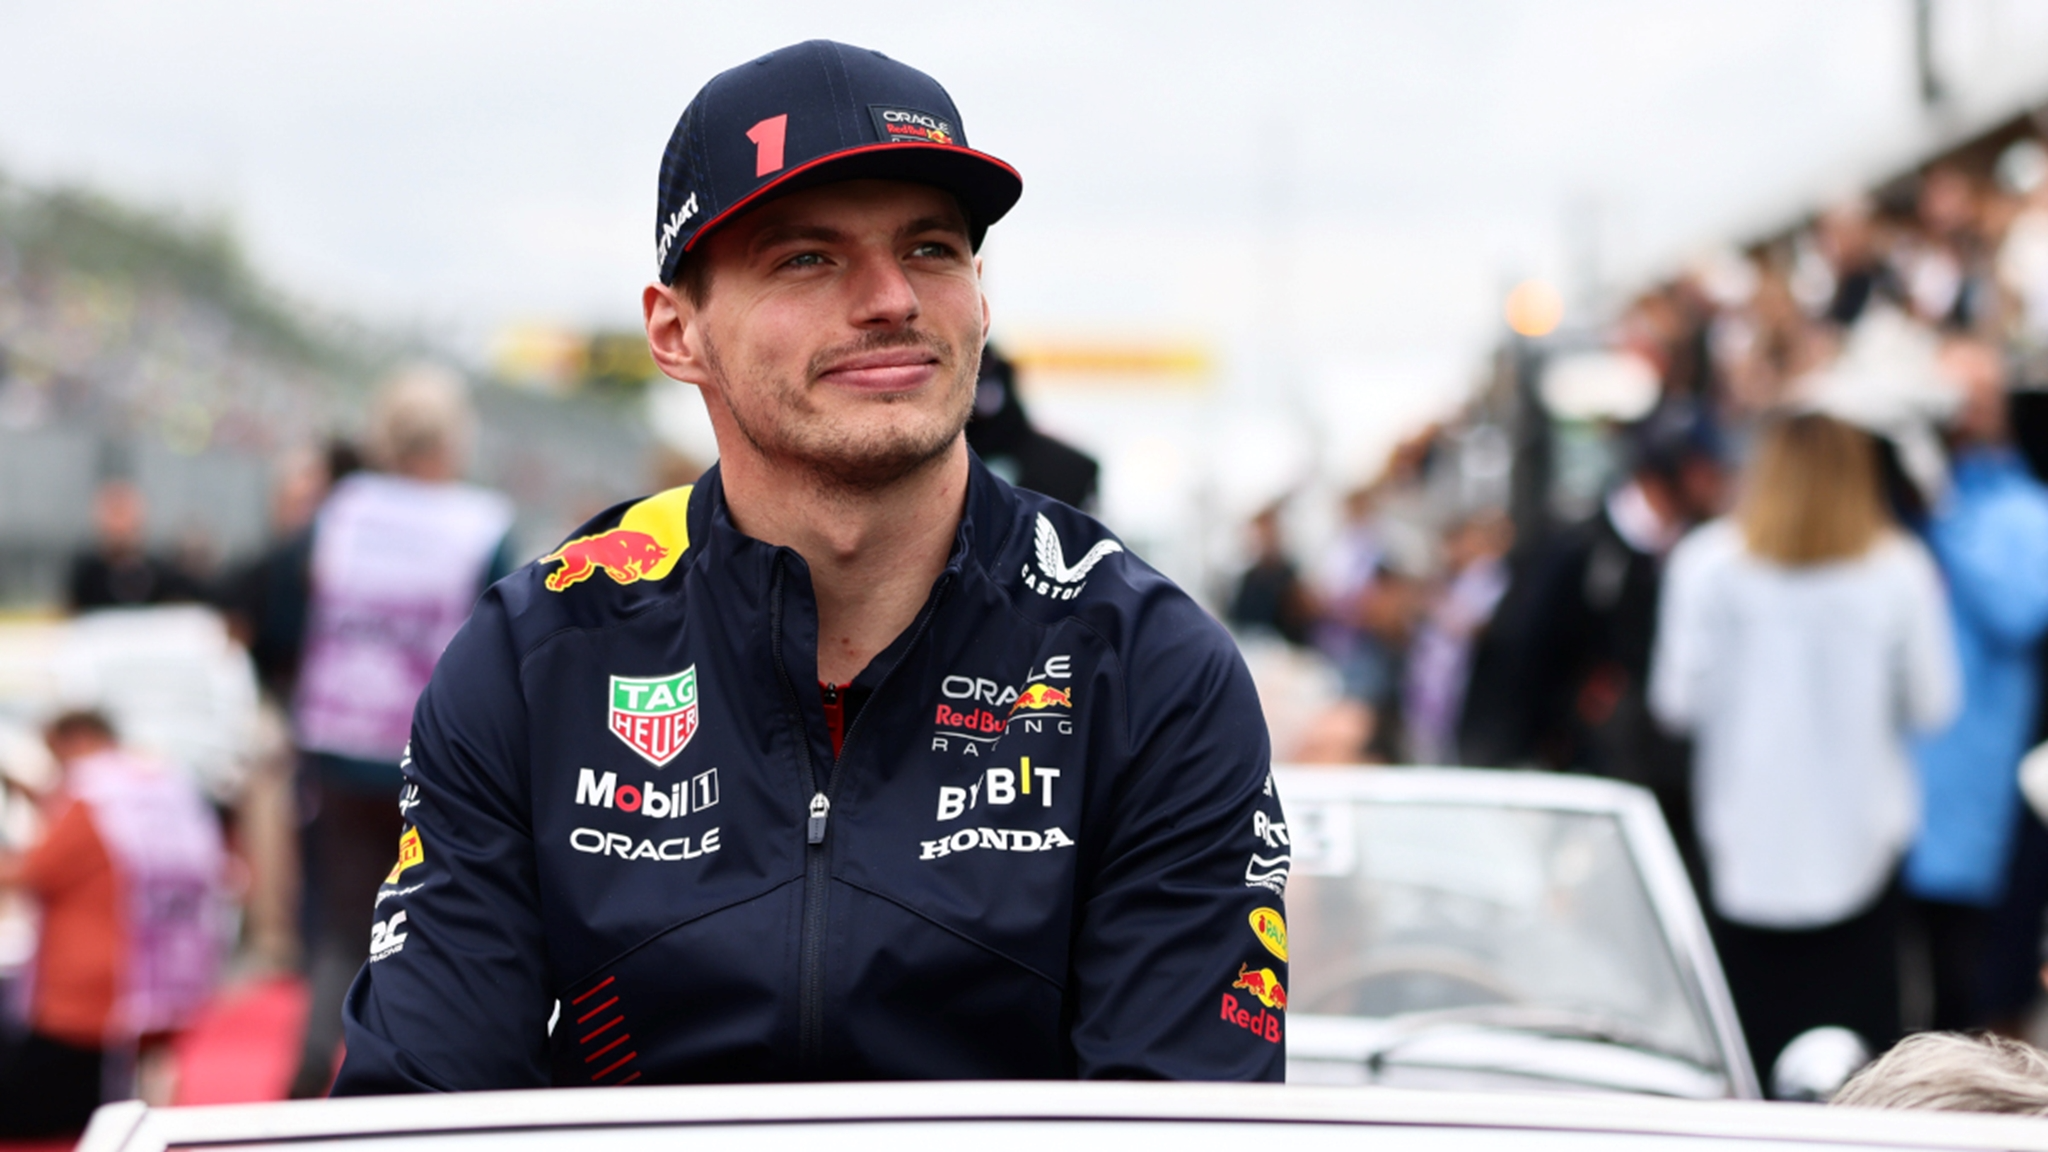 Verstappen: The Most Important Thing for Me was to Stay Ahead on the First Lap